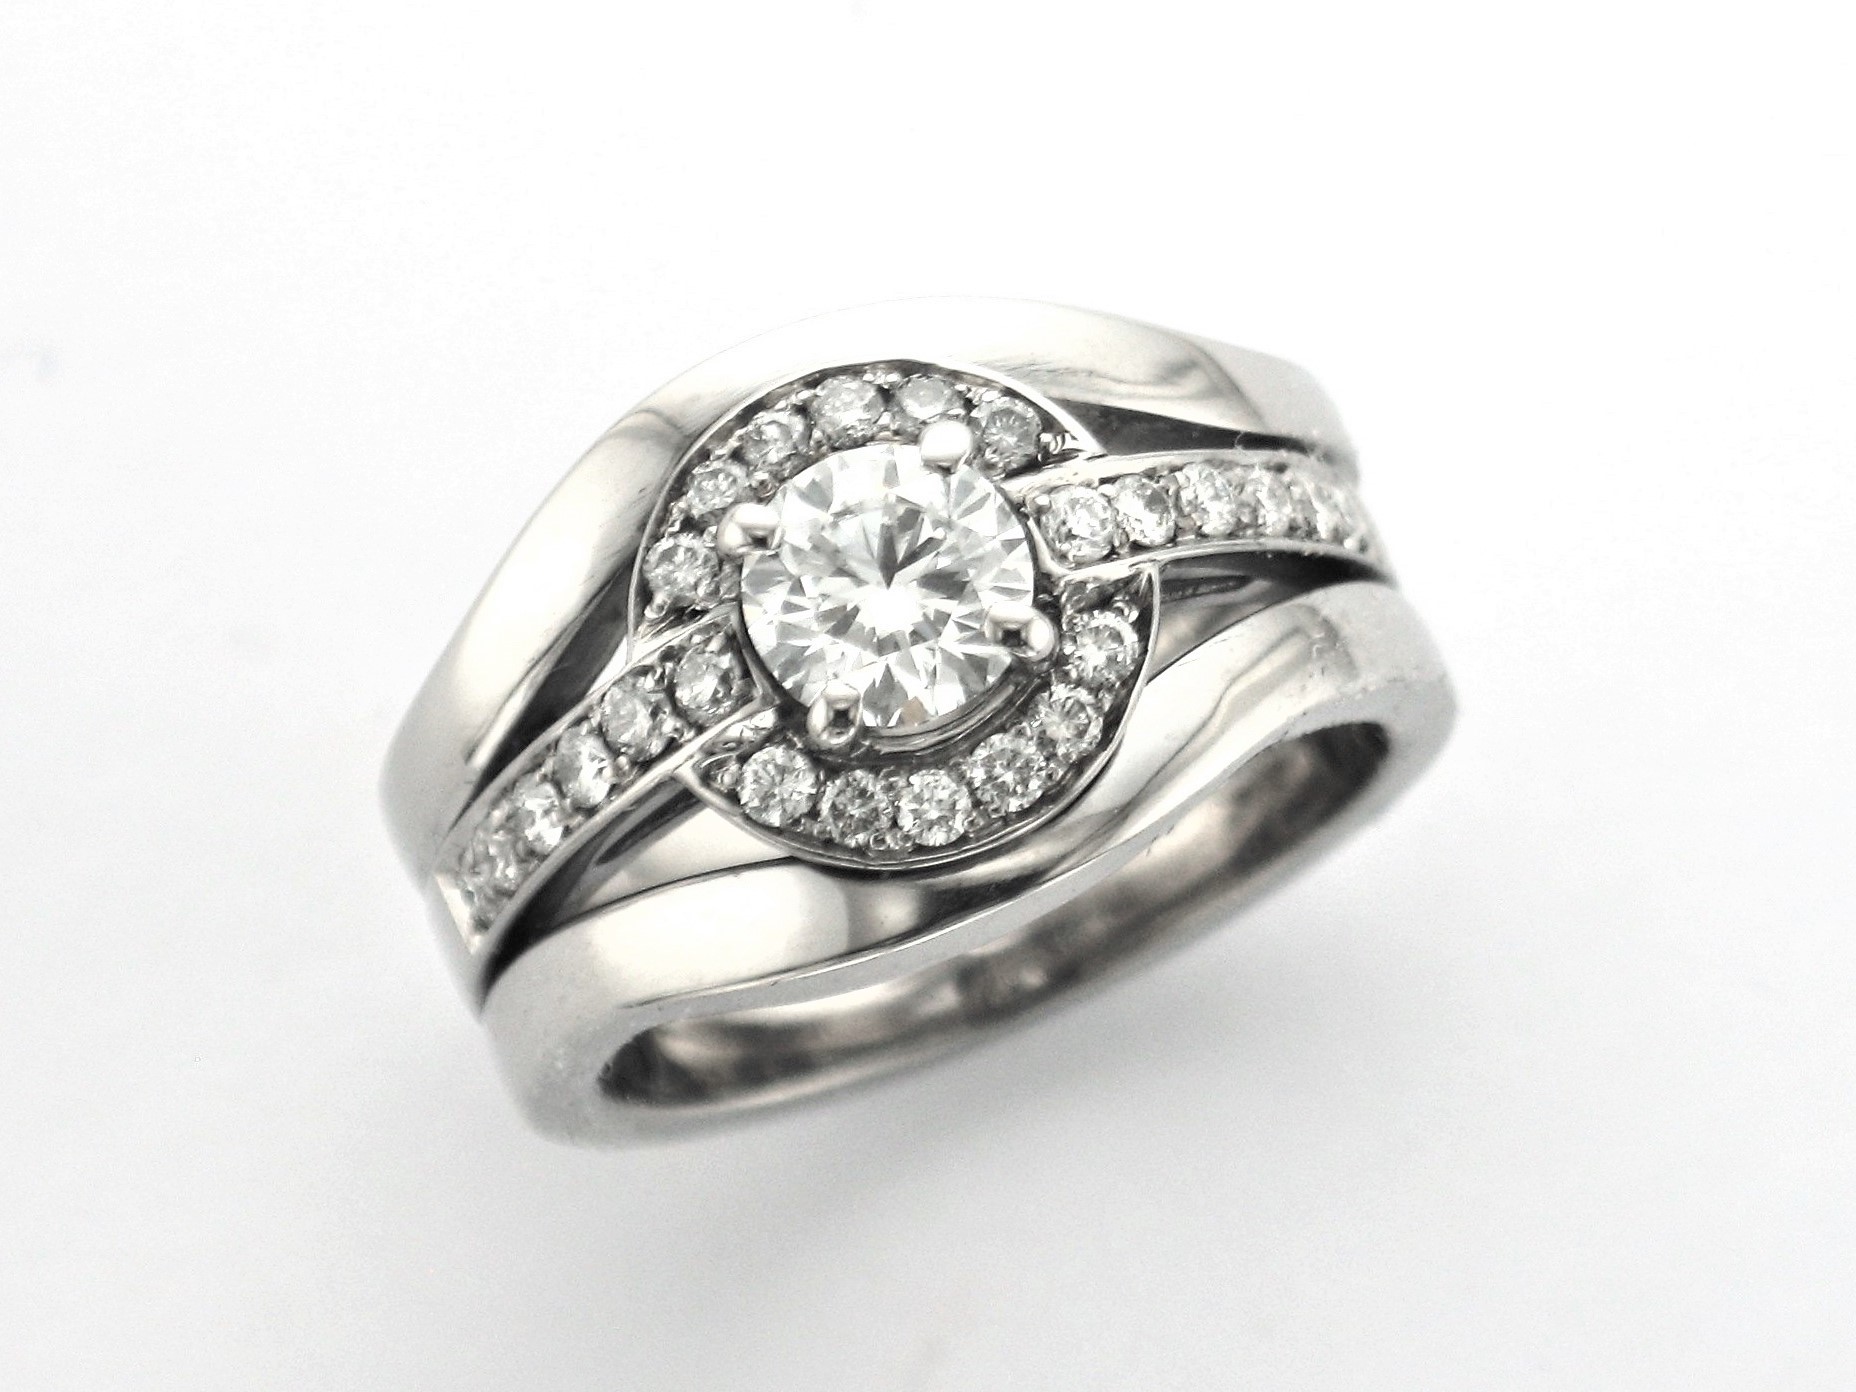 Stunning Wedding Ring designed using Client’s existing wedding bands with a new Brilliant Cut Diamond set halo centre.